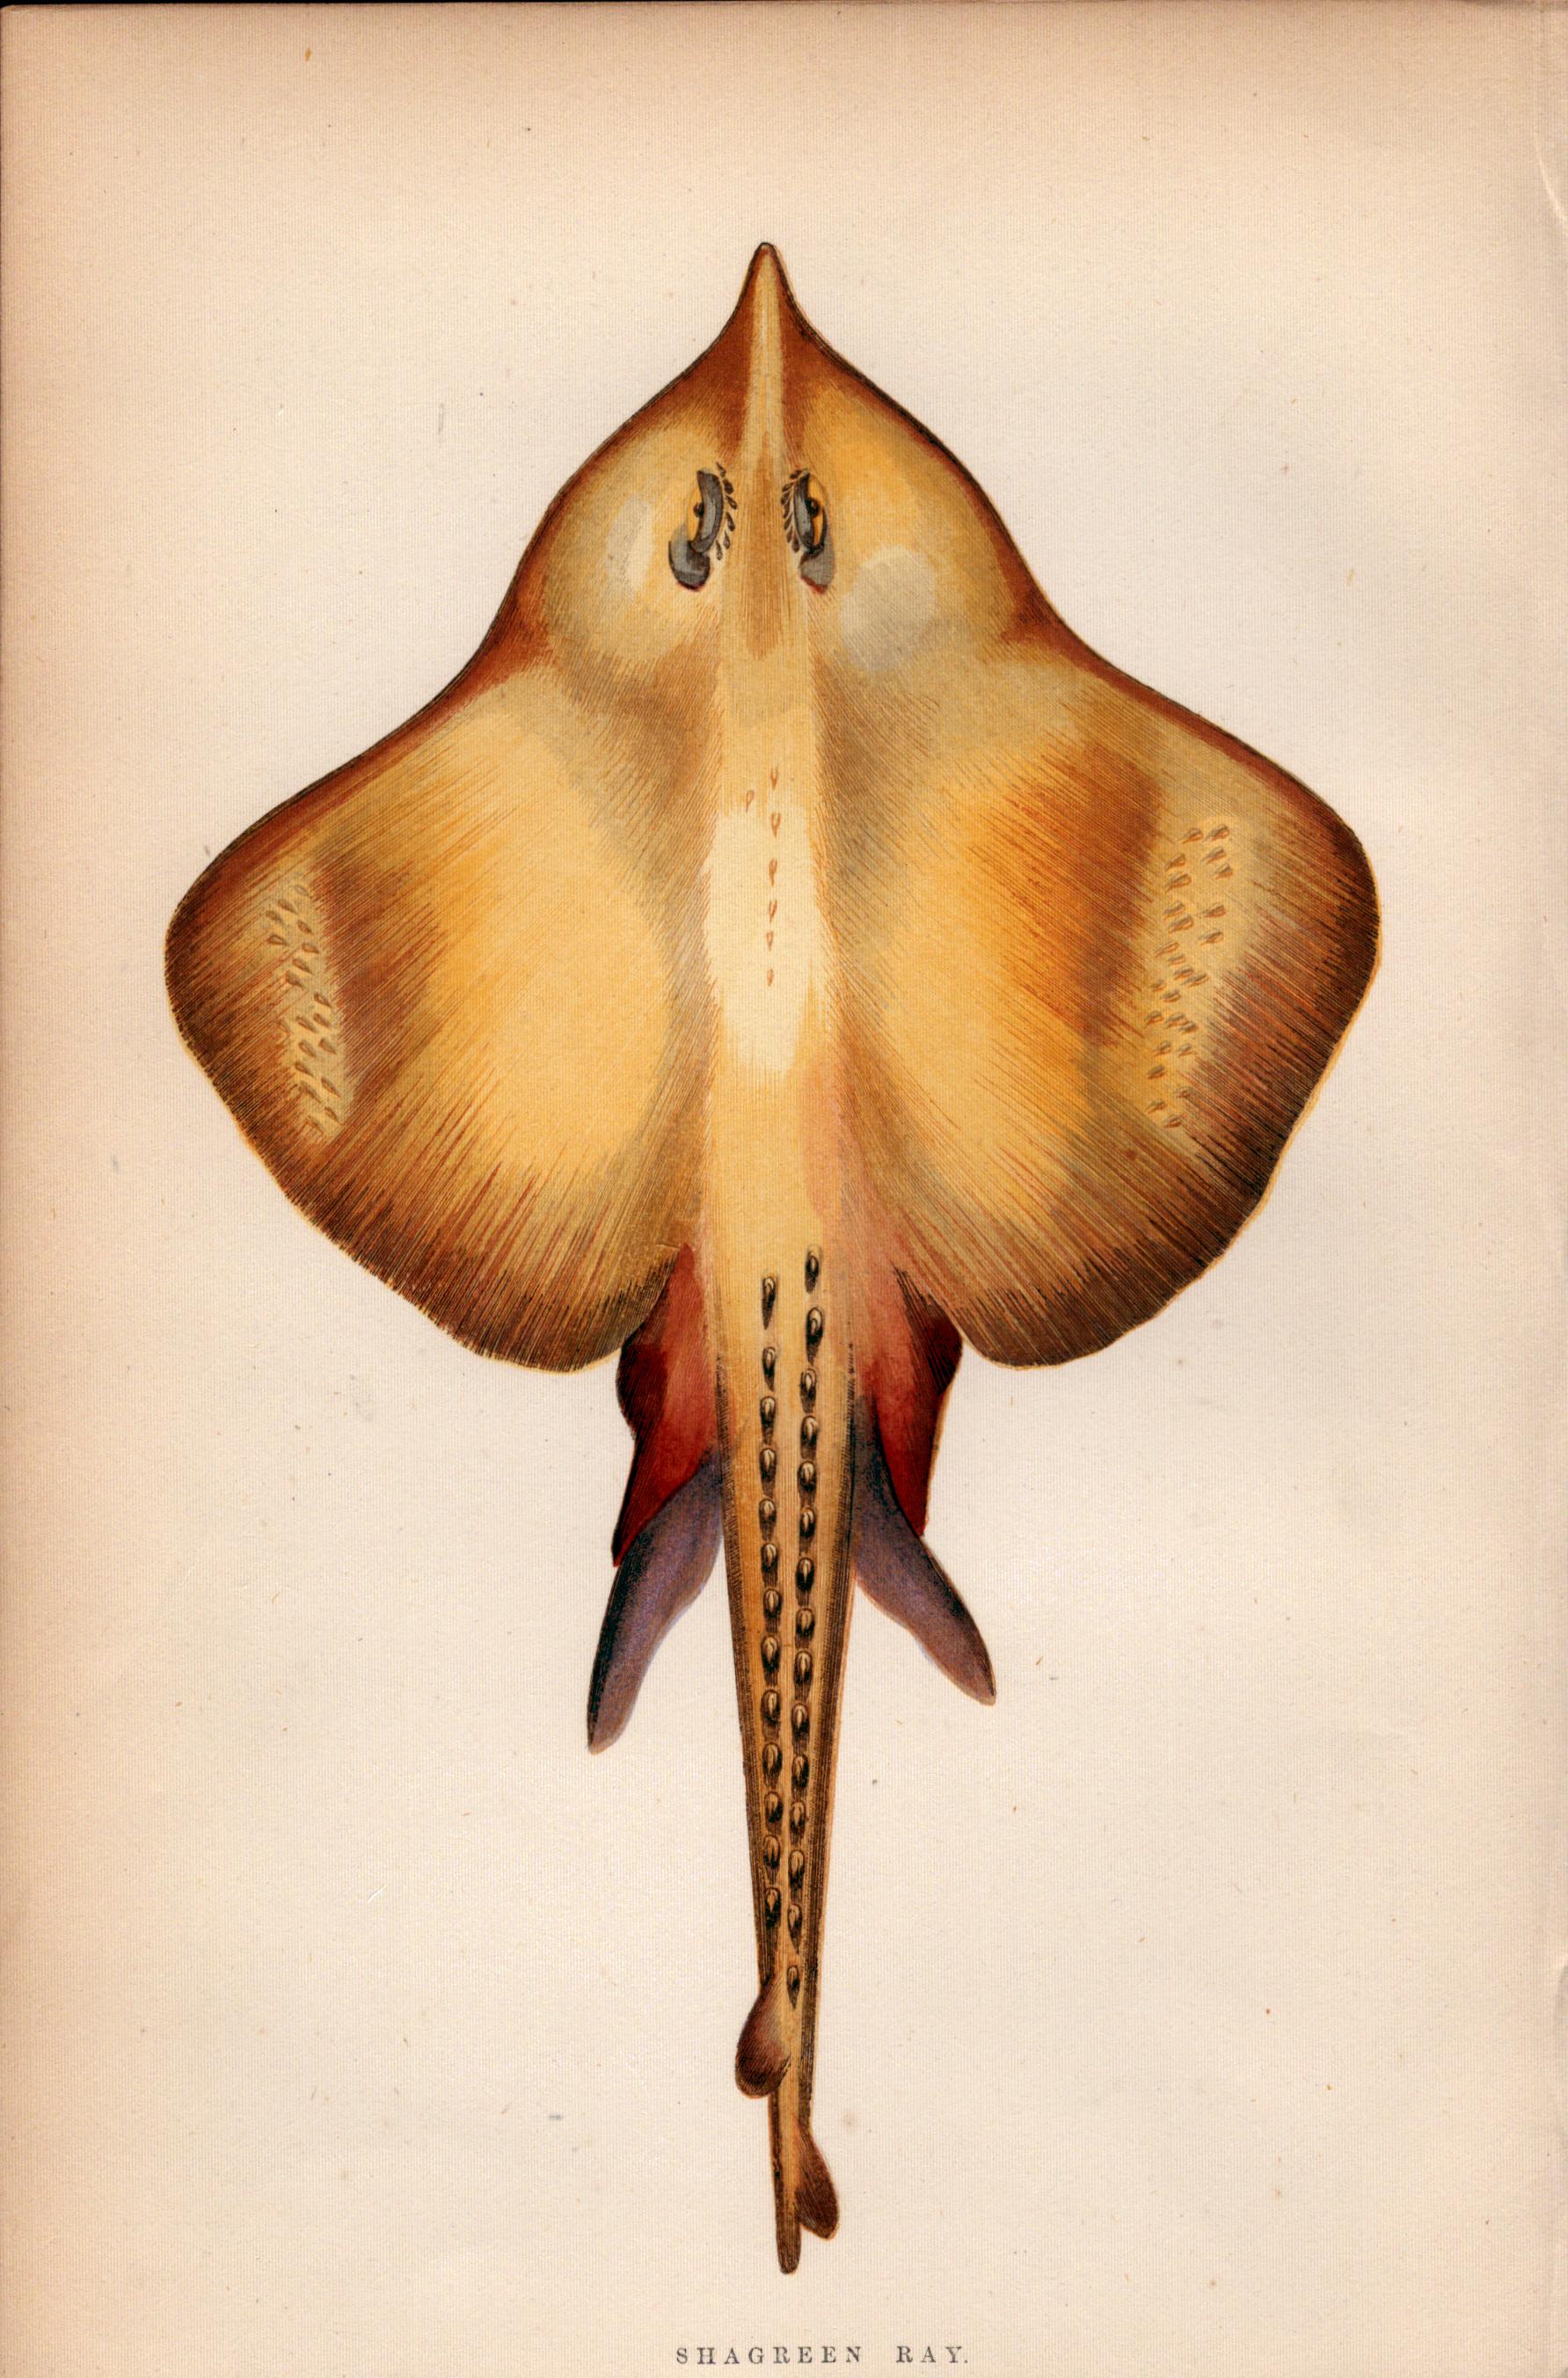 Shargreen Ray 1869 Antique Johnathan Couch Coloured Engraving.